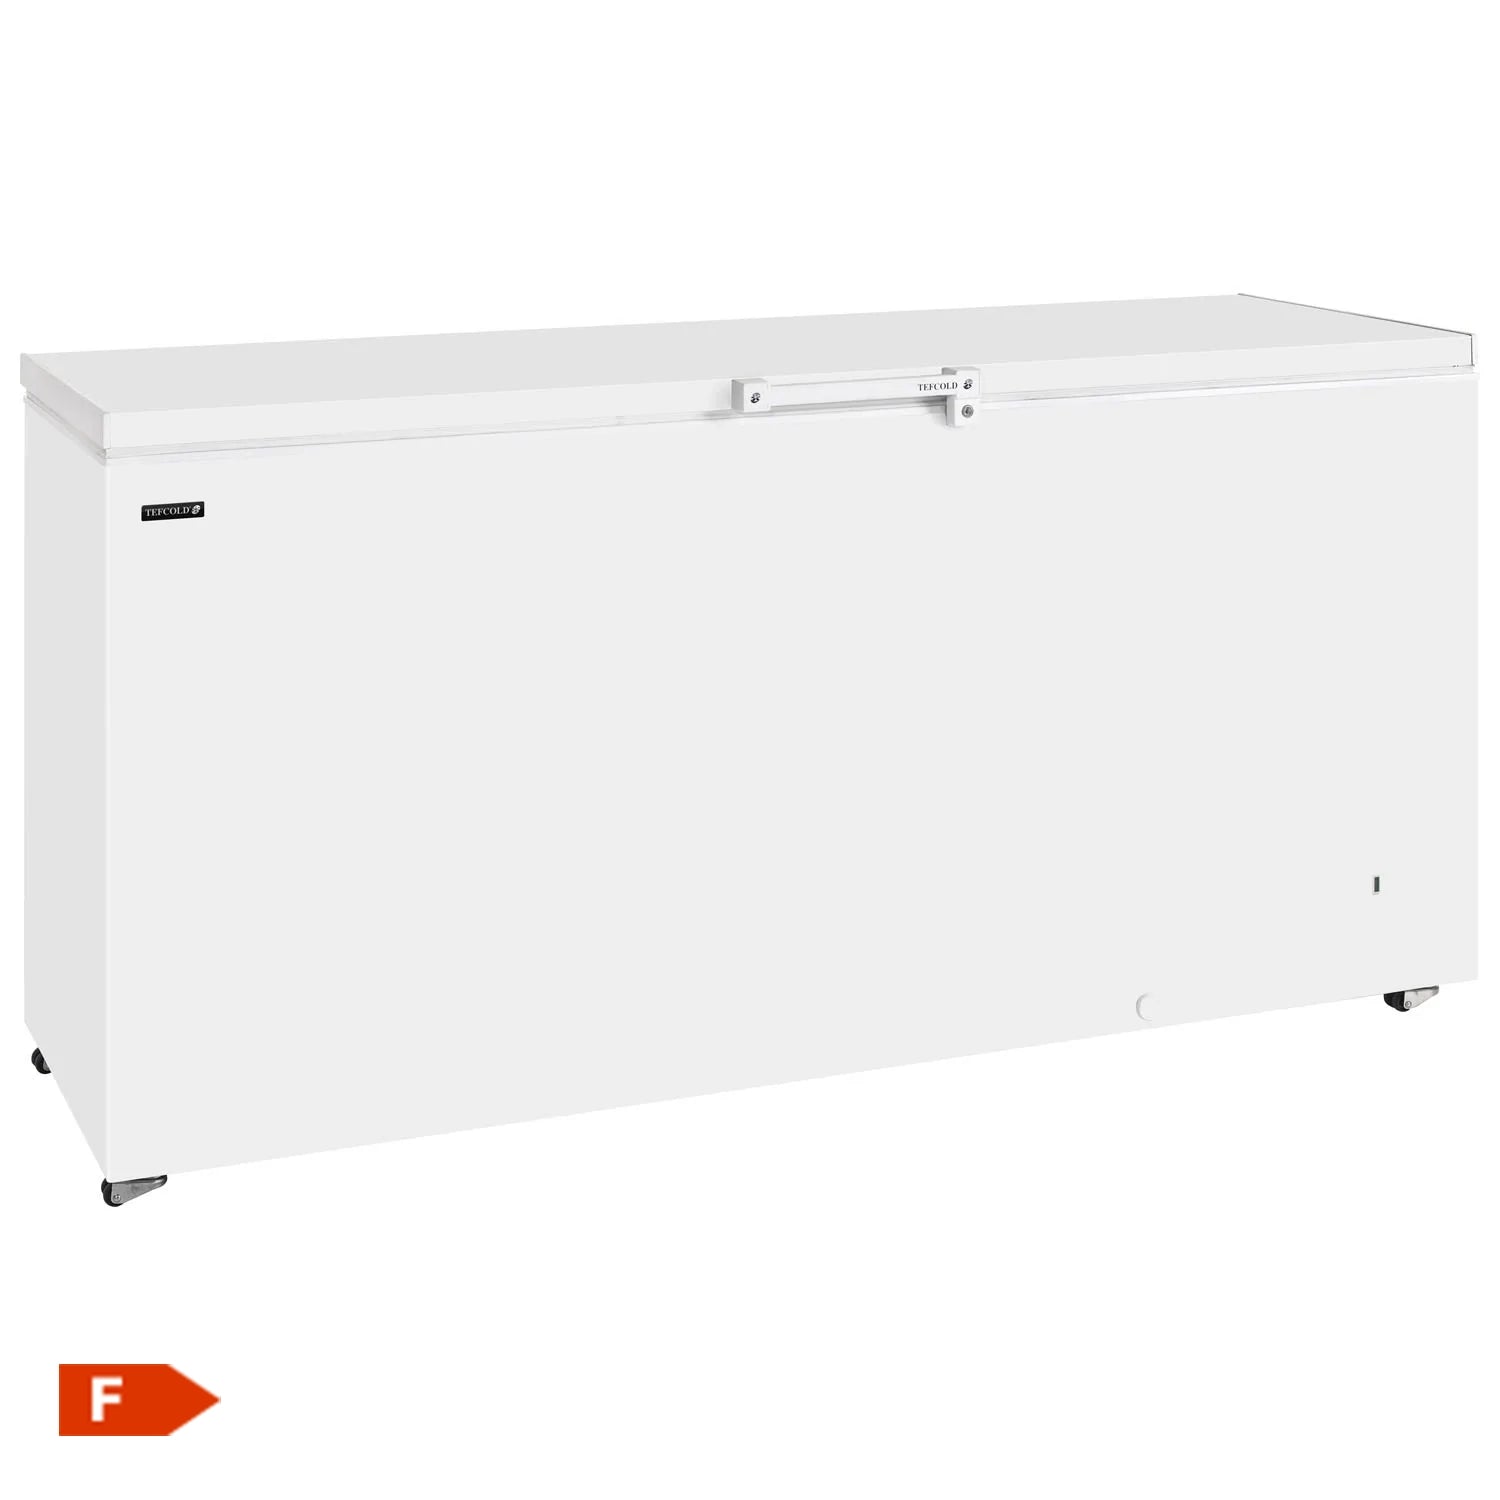 Tefcold GM Range Solid Lid Chest Freezer.Product Ref:00484.MODEL:GM600..🚚 4-6 days Delivery